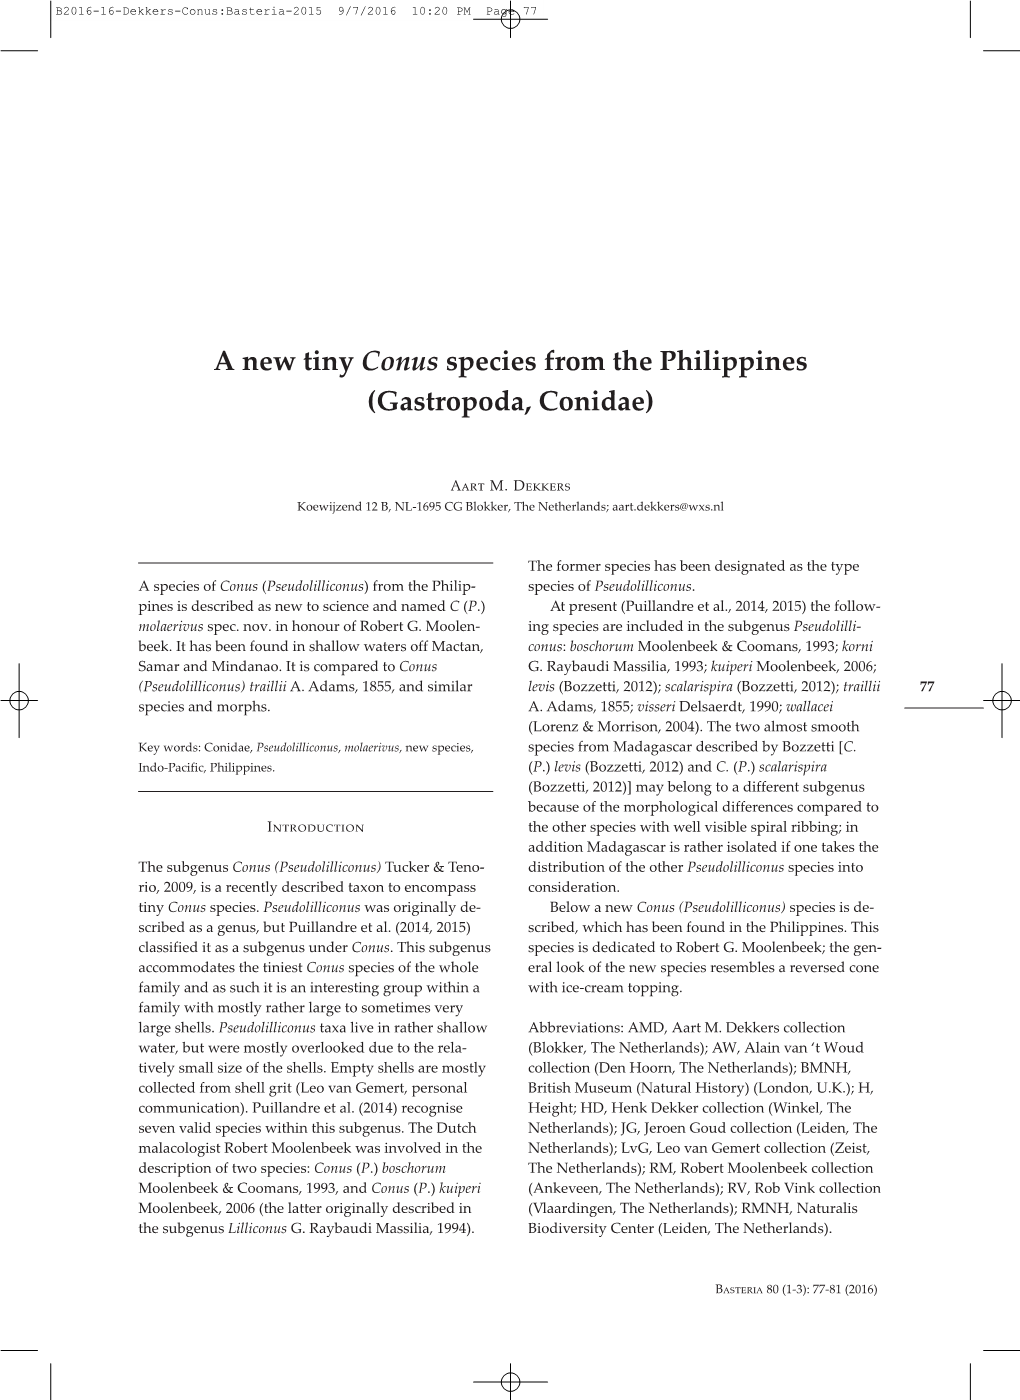 A New Tiny Conus Species from the Philippines (Gastropoda, Conidae)